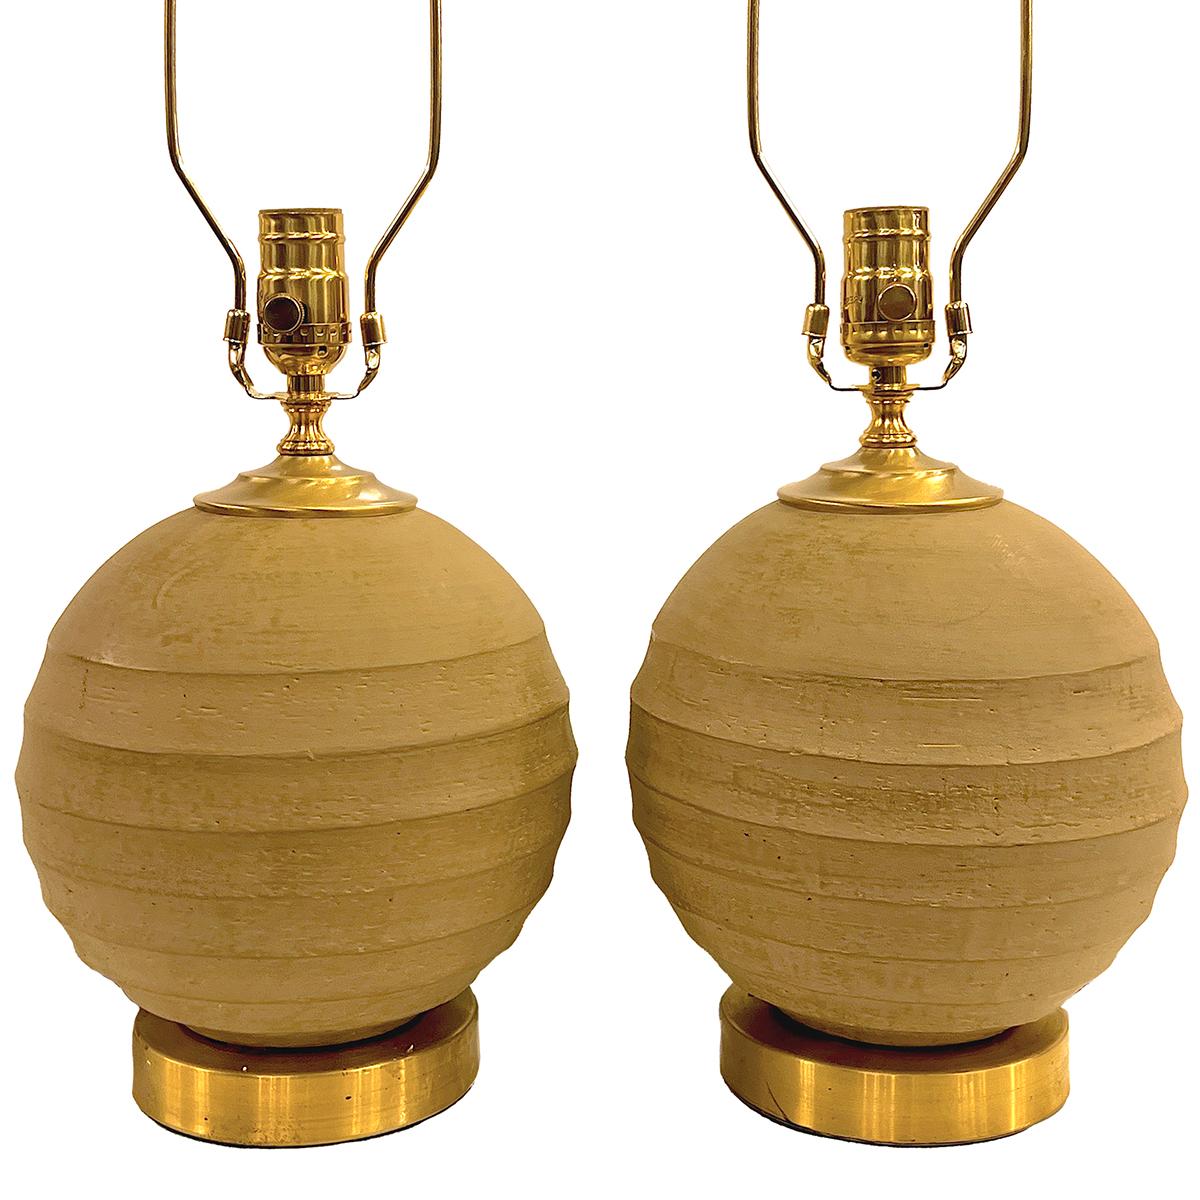 Pair of circa 1970's Italian ceramic table lamps with gilt bases.

Measurements:
Height of body: 10